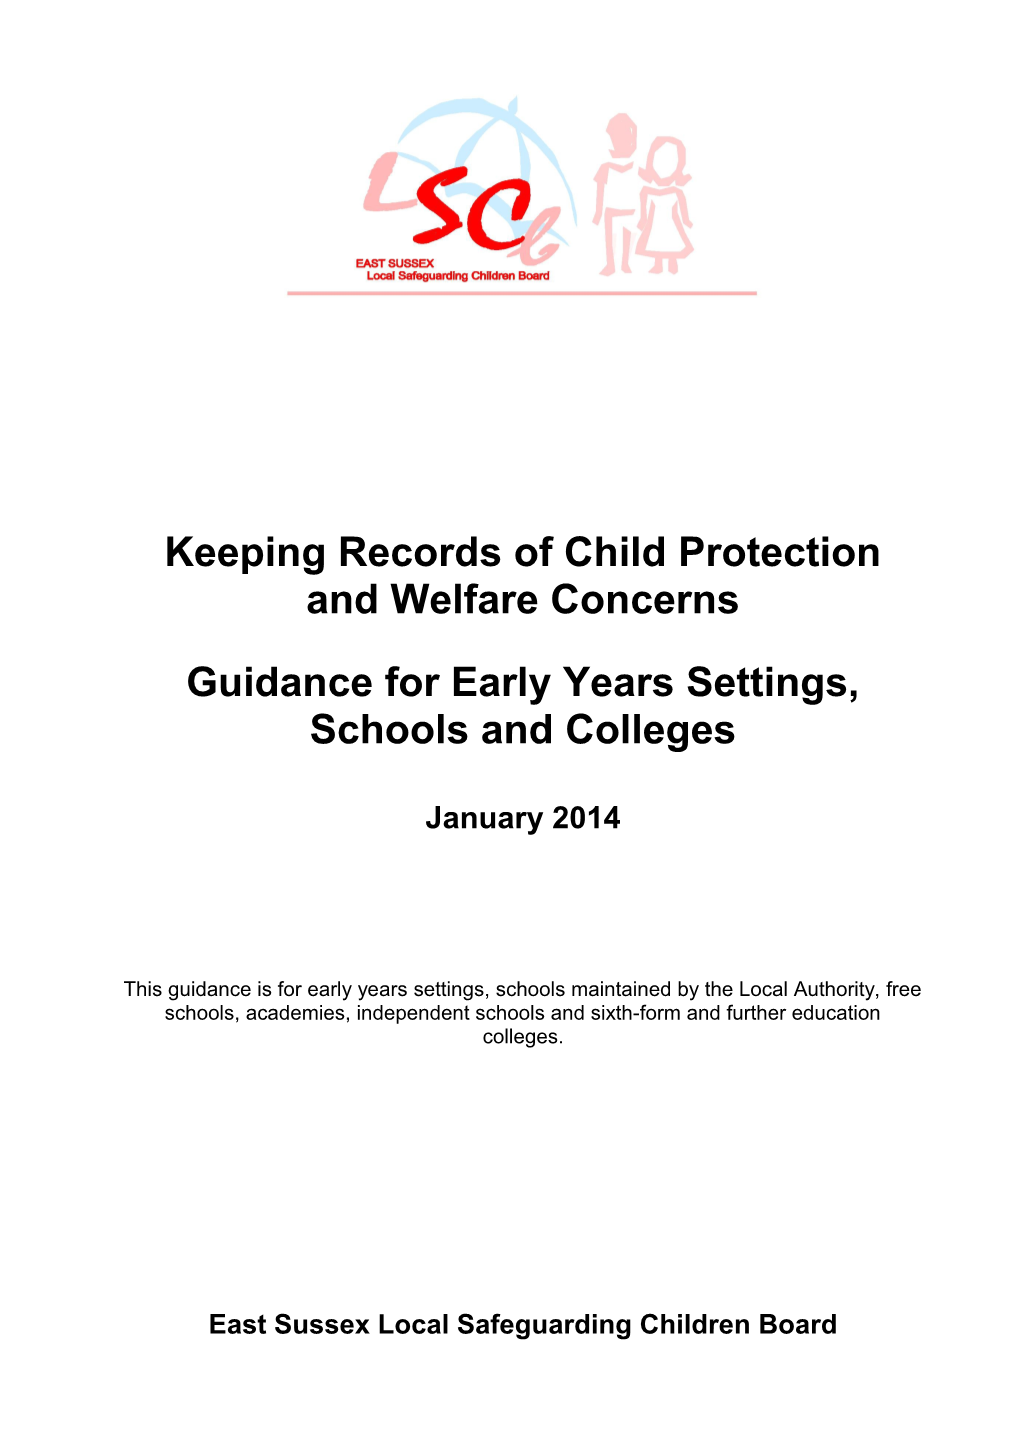 Child Protection Record Keeping in Educational Establishments, Jan 2014